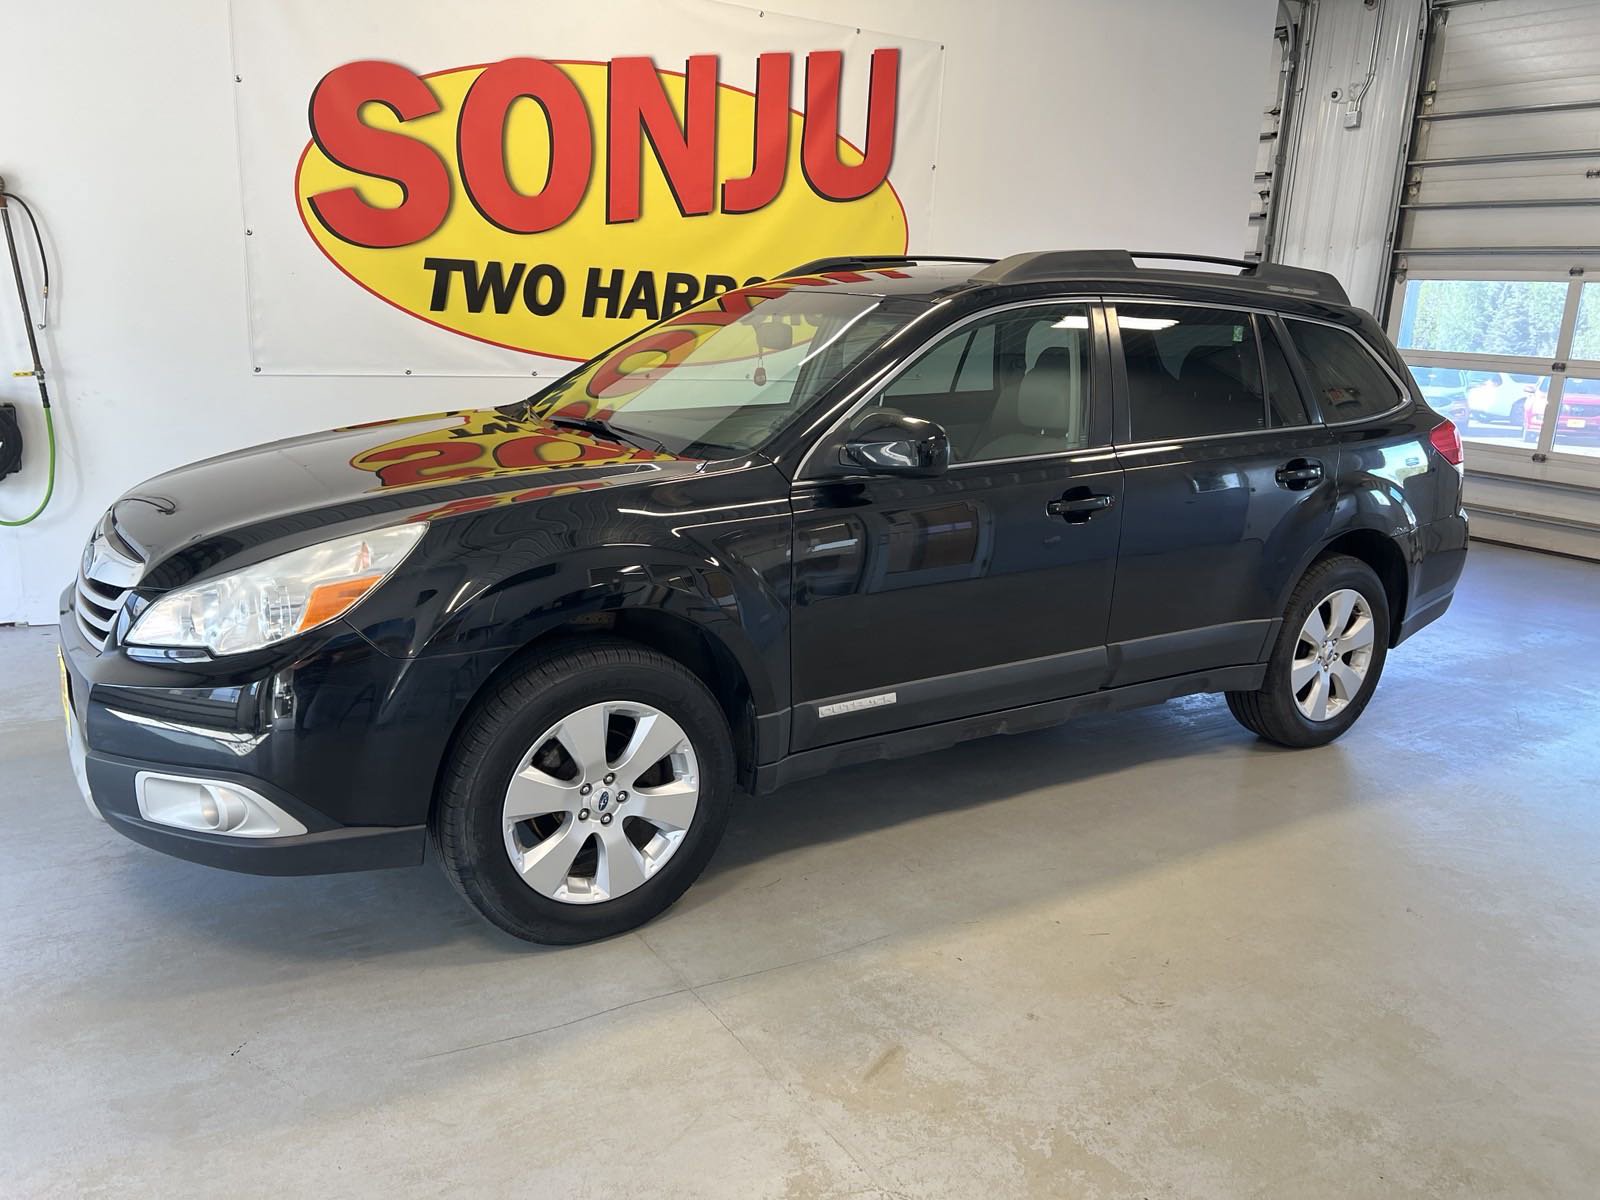 Used 2012 Subaru Outback Limited with VIN 4S4BRCKC4C3254719 for sale in Two Harbors, Minnesota